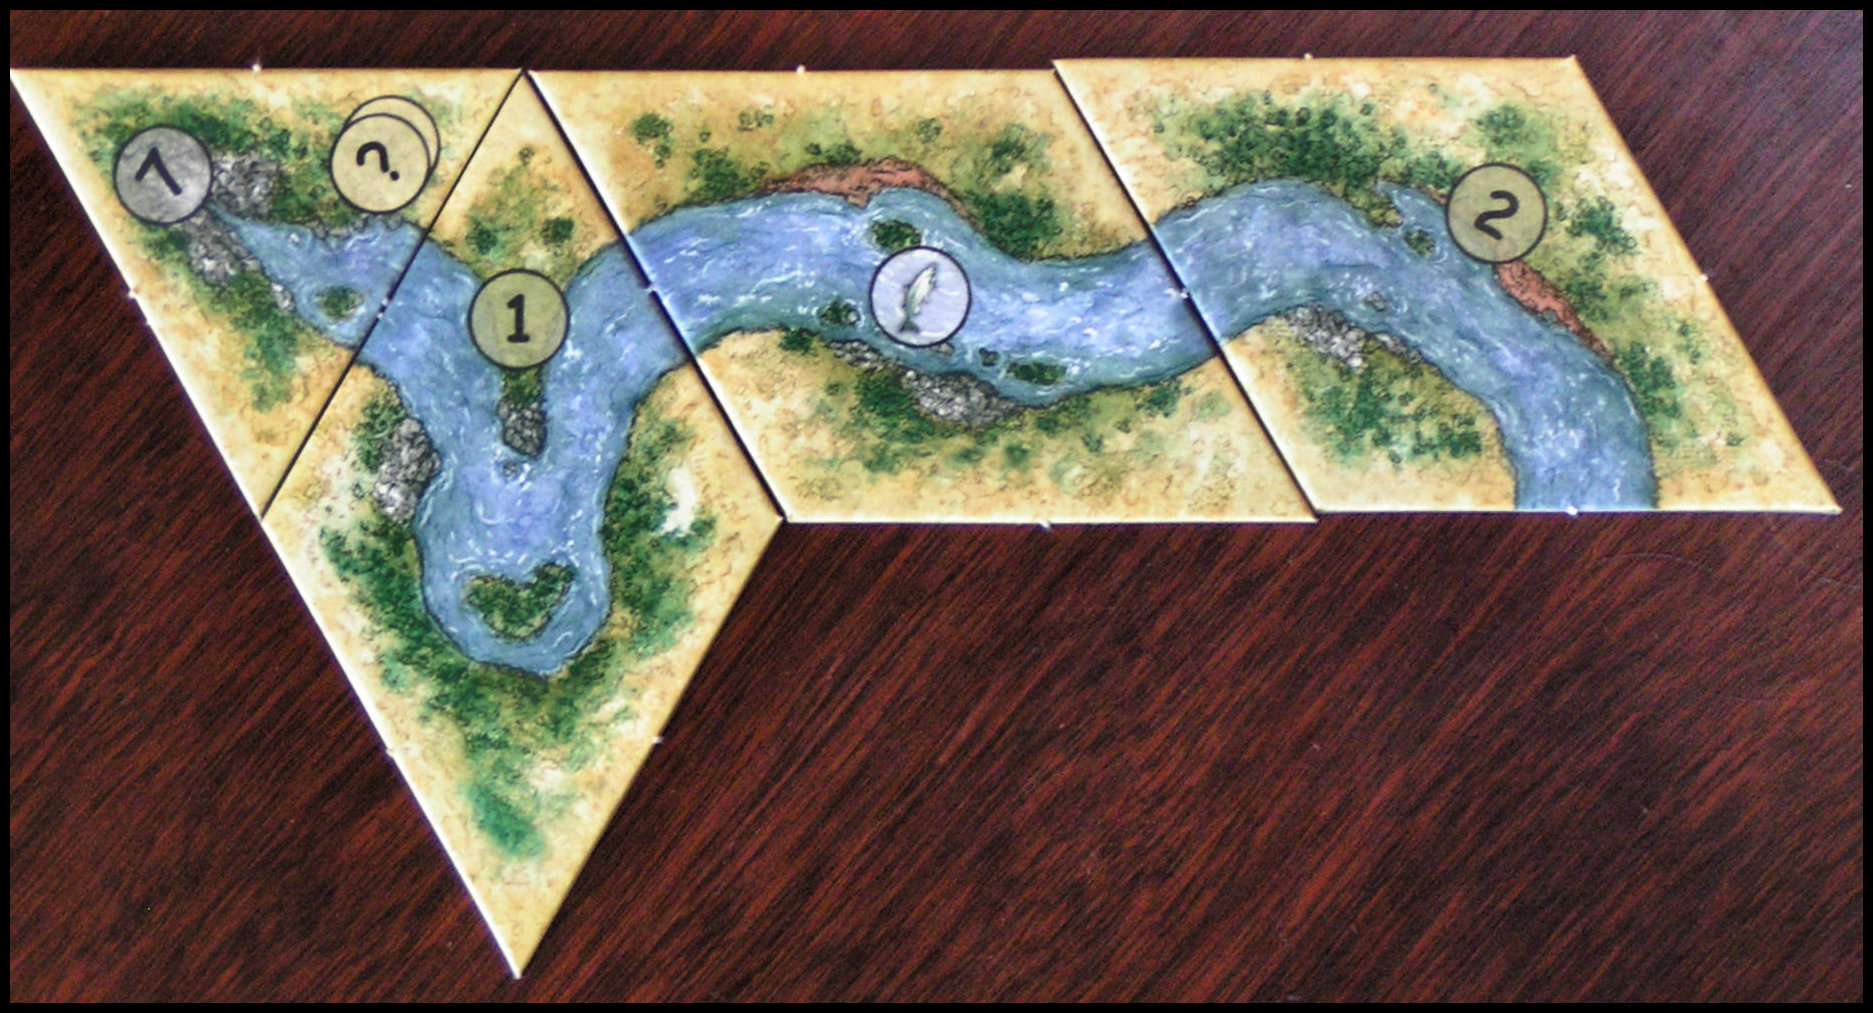 Lost Valley - River Tiles